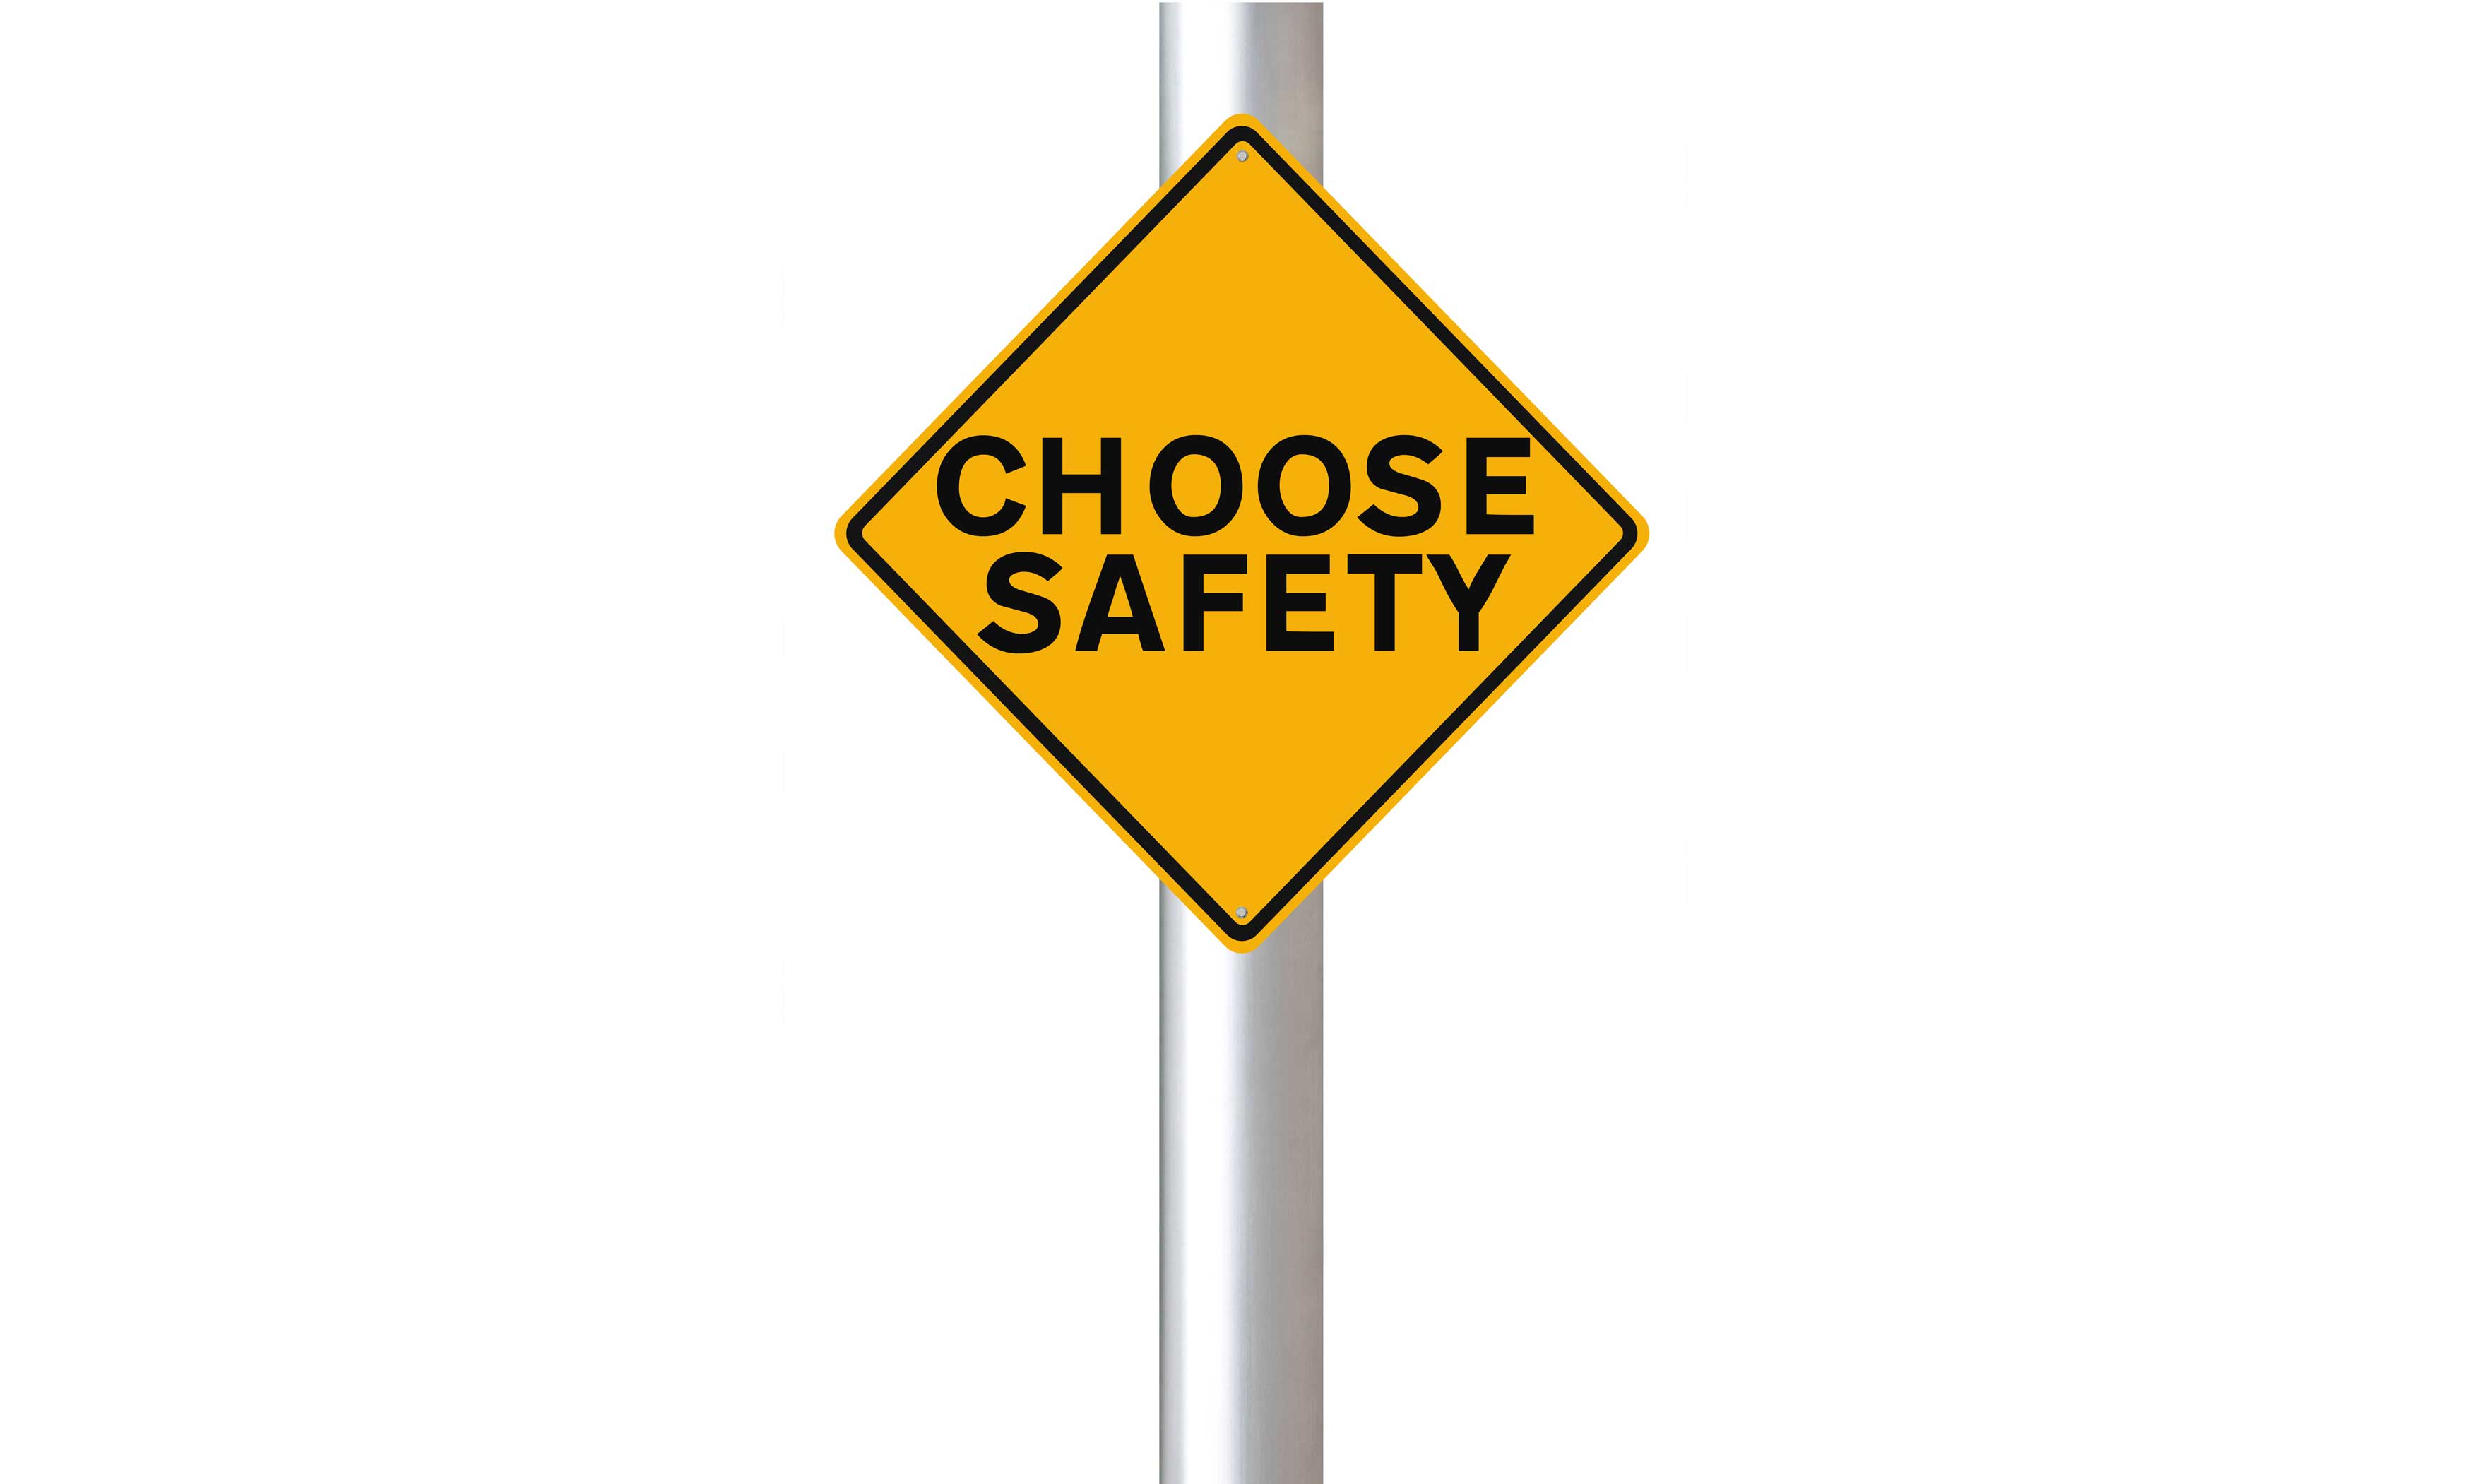 Special Member Forum: Safety is No Accident